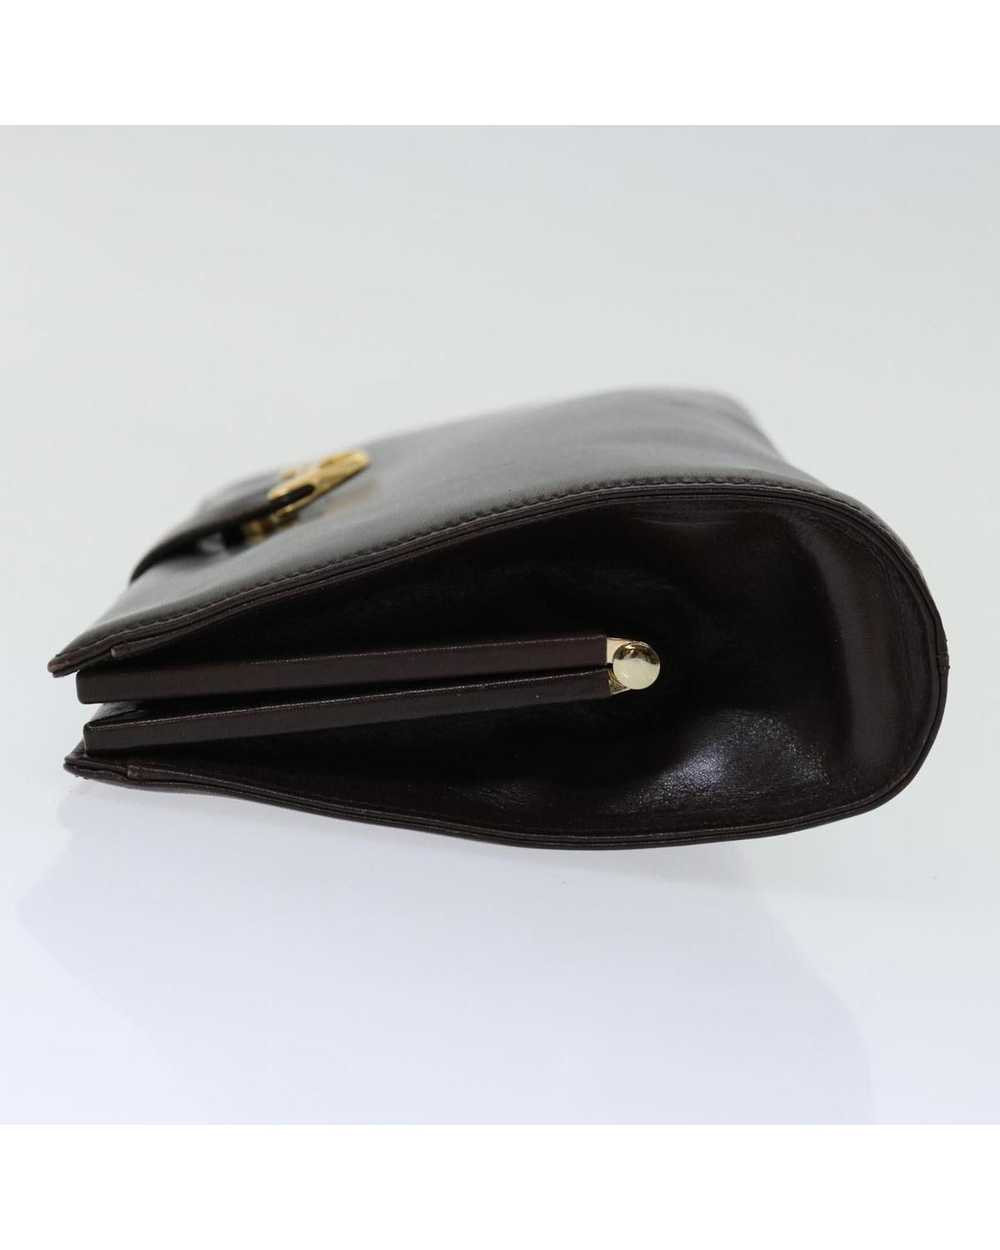 Givenchy Brown Leather Clutch Bag with Elegant De… - image 4